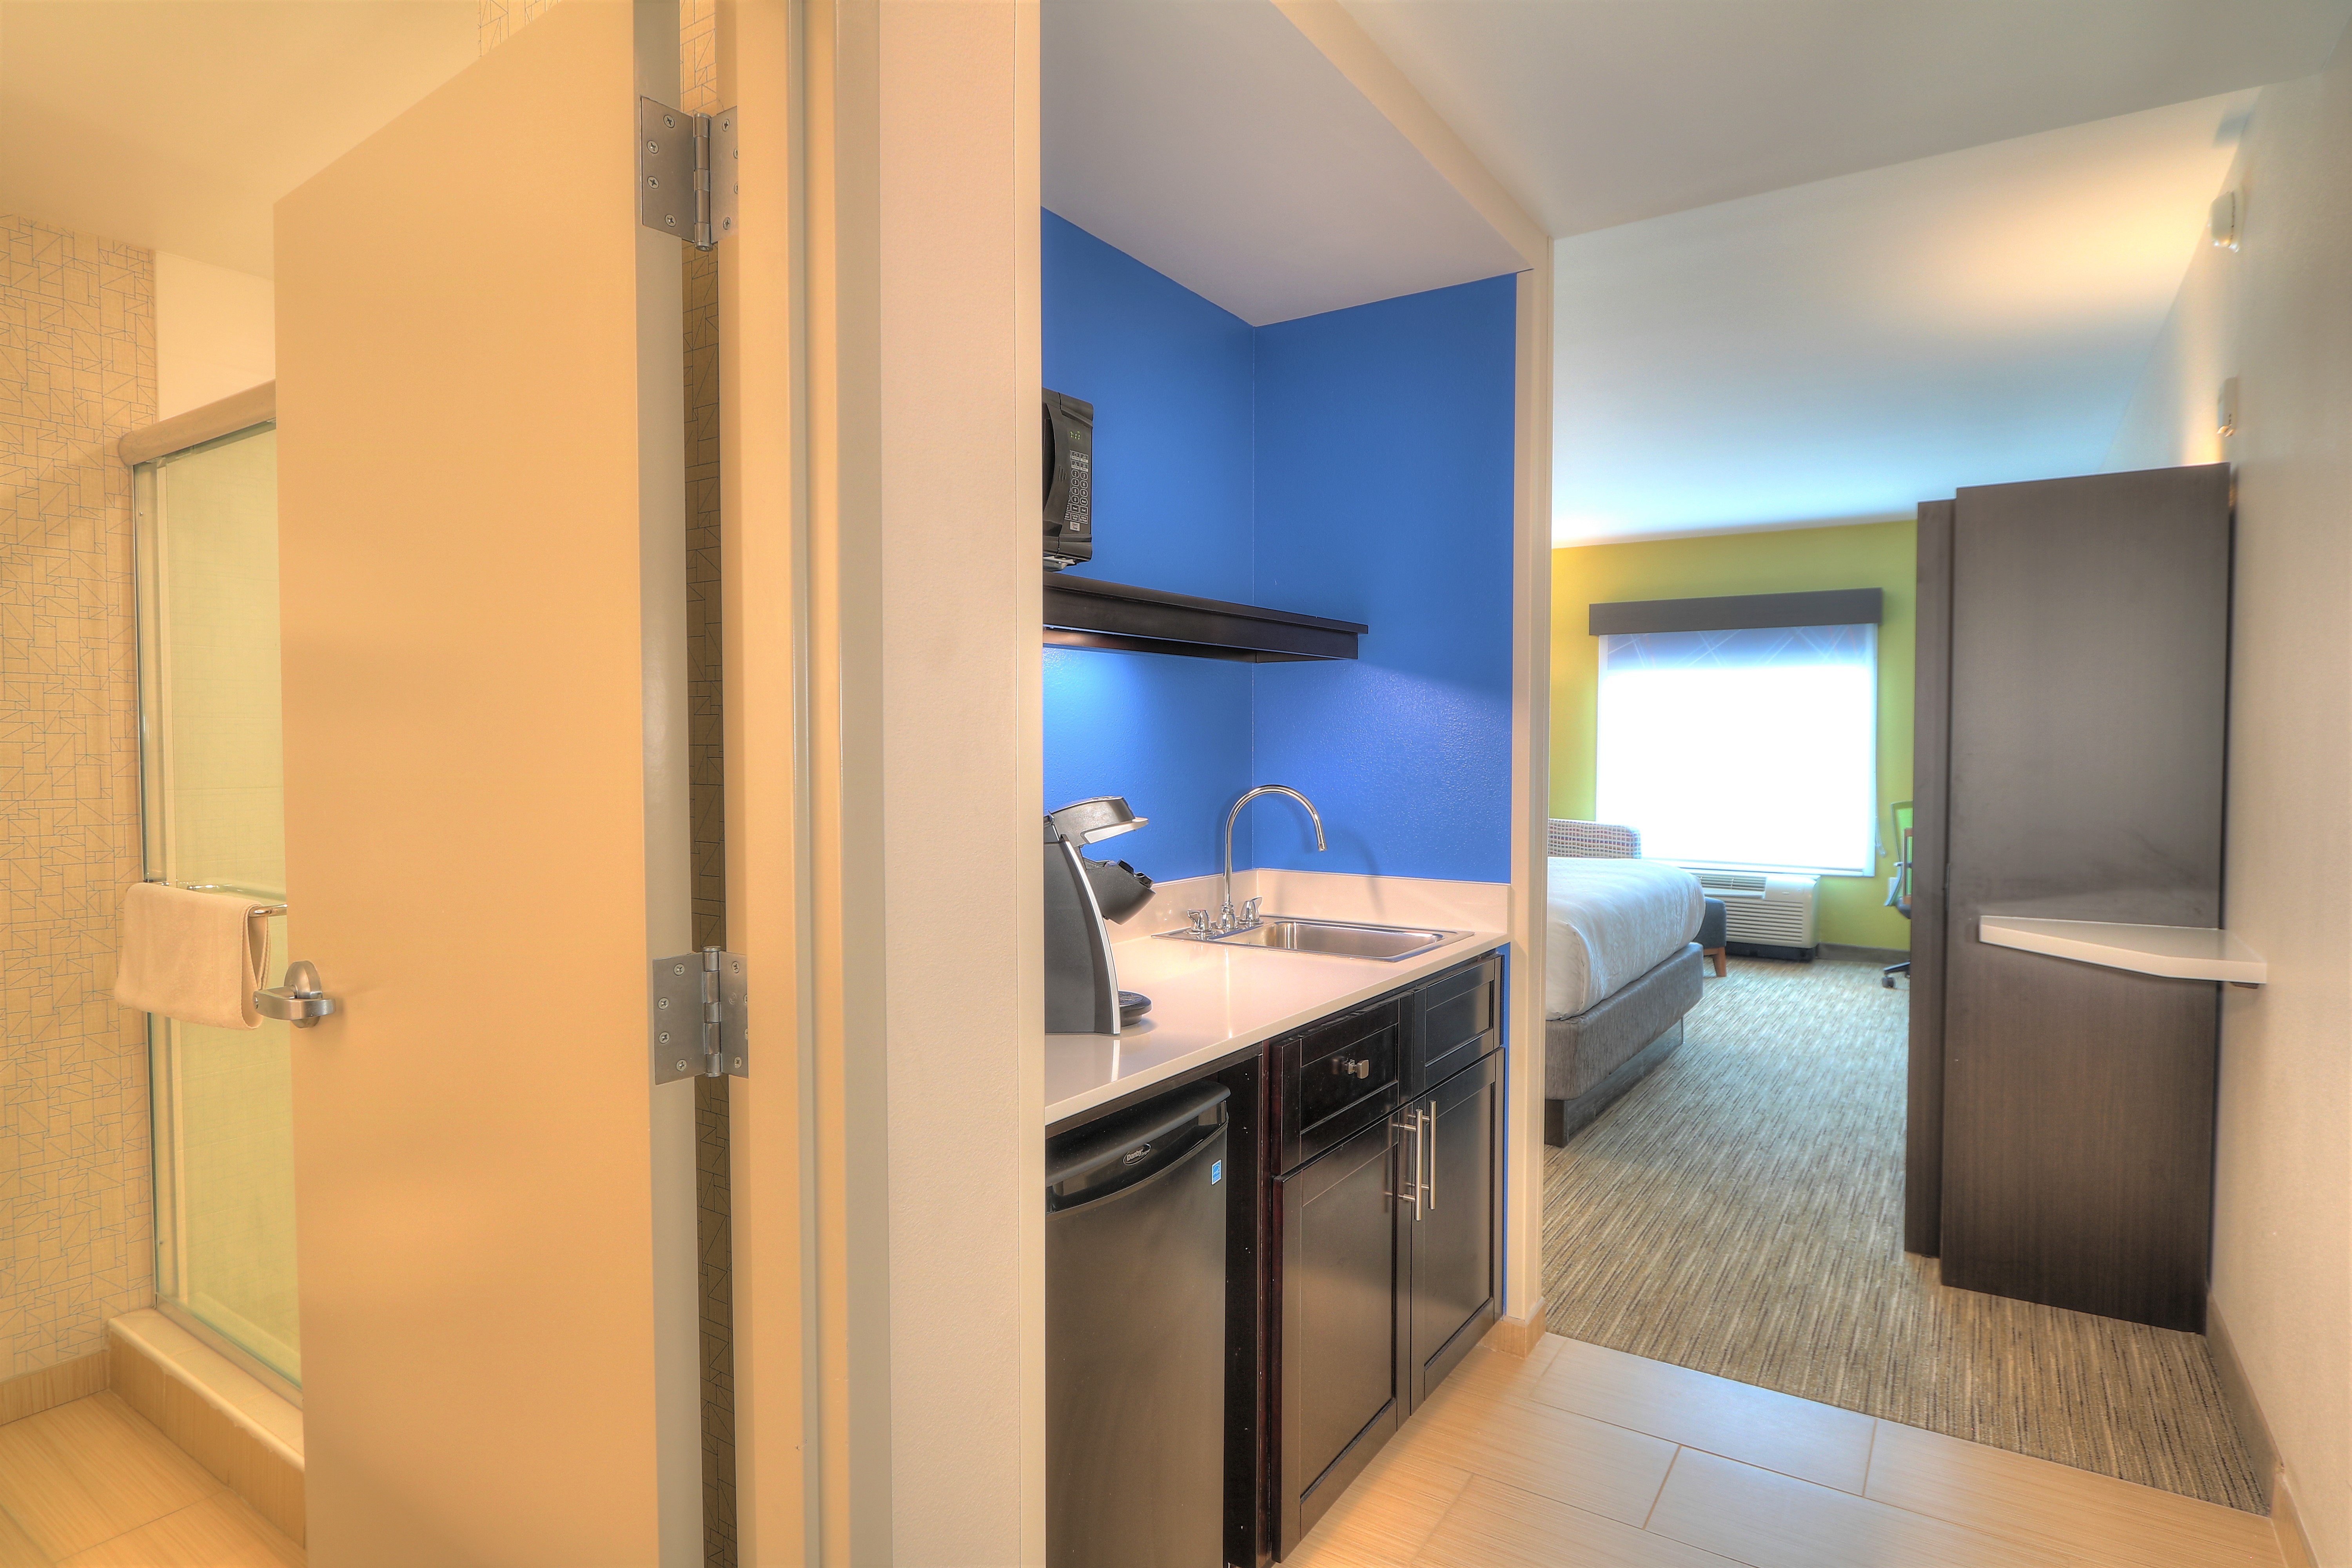 Executive King Guest Room features a walk in shower and much more